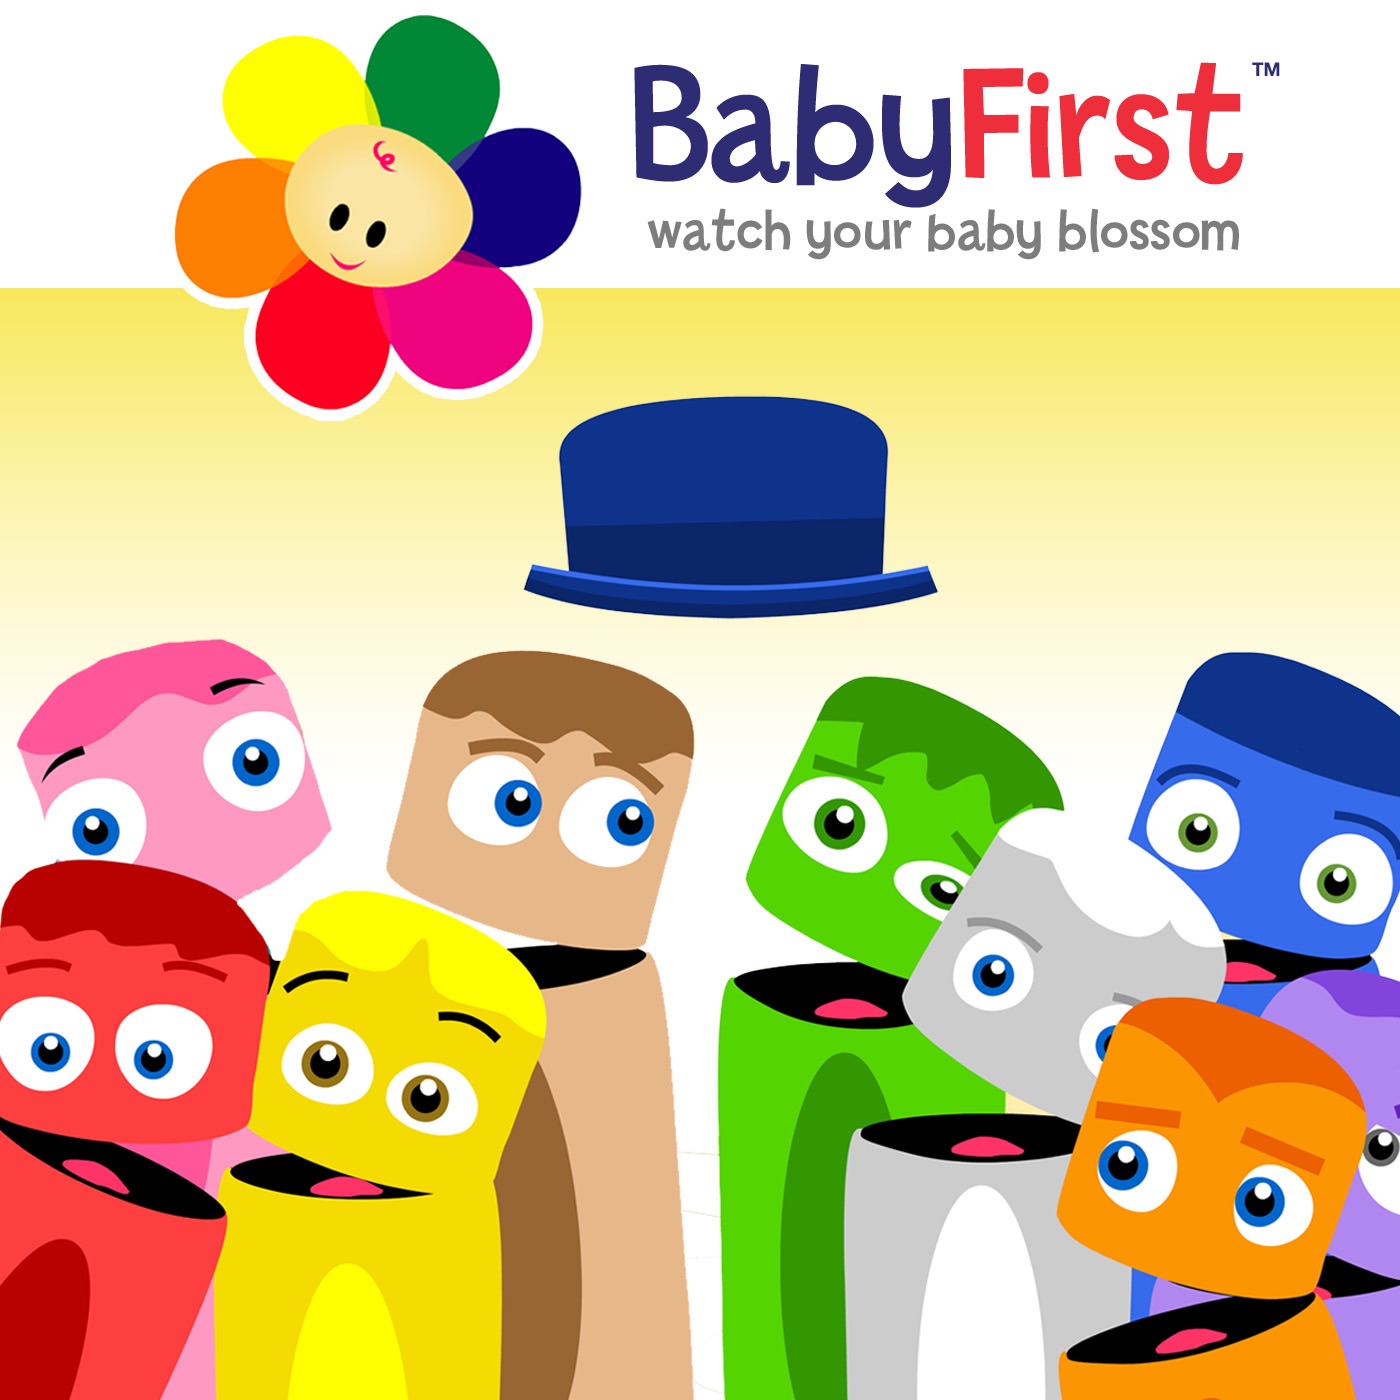 Baby Color Chart